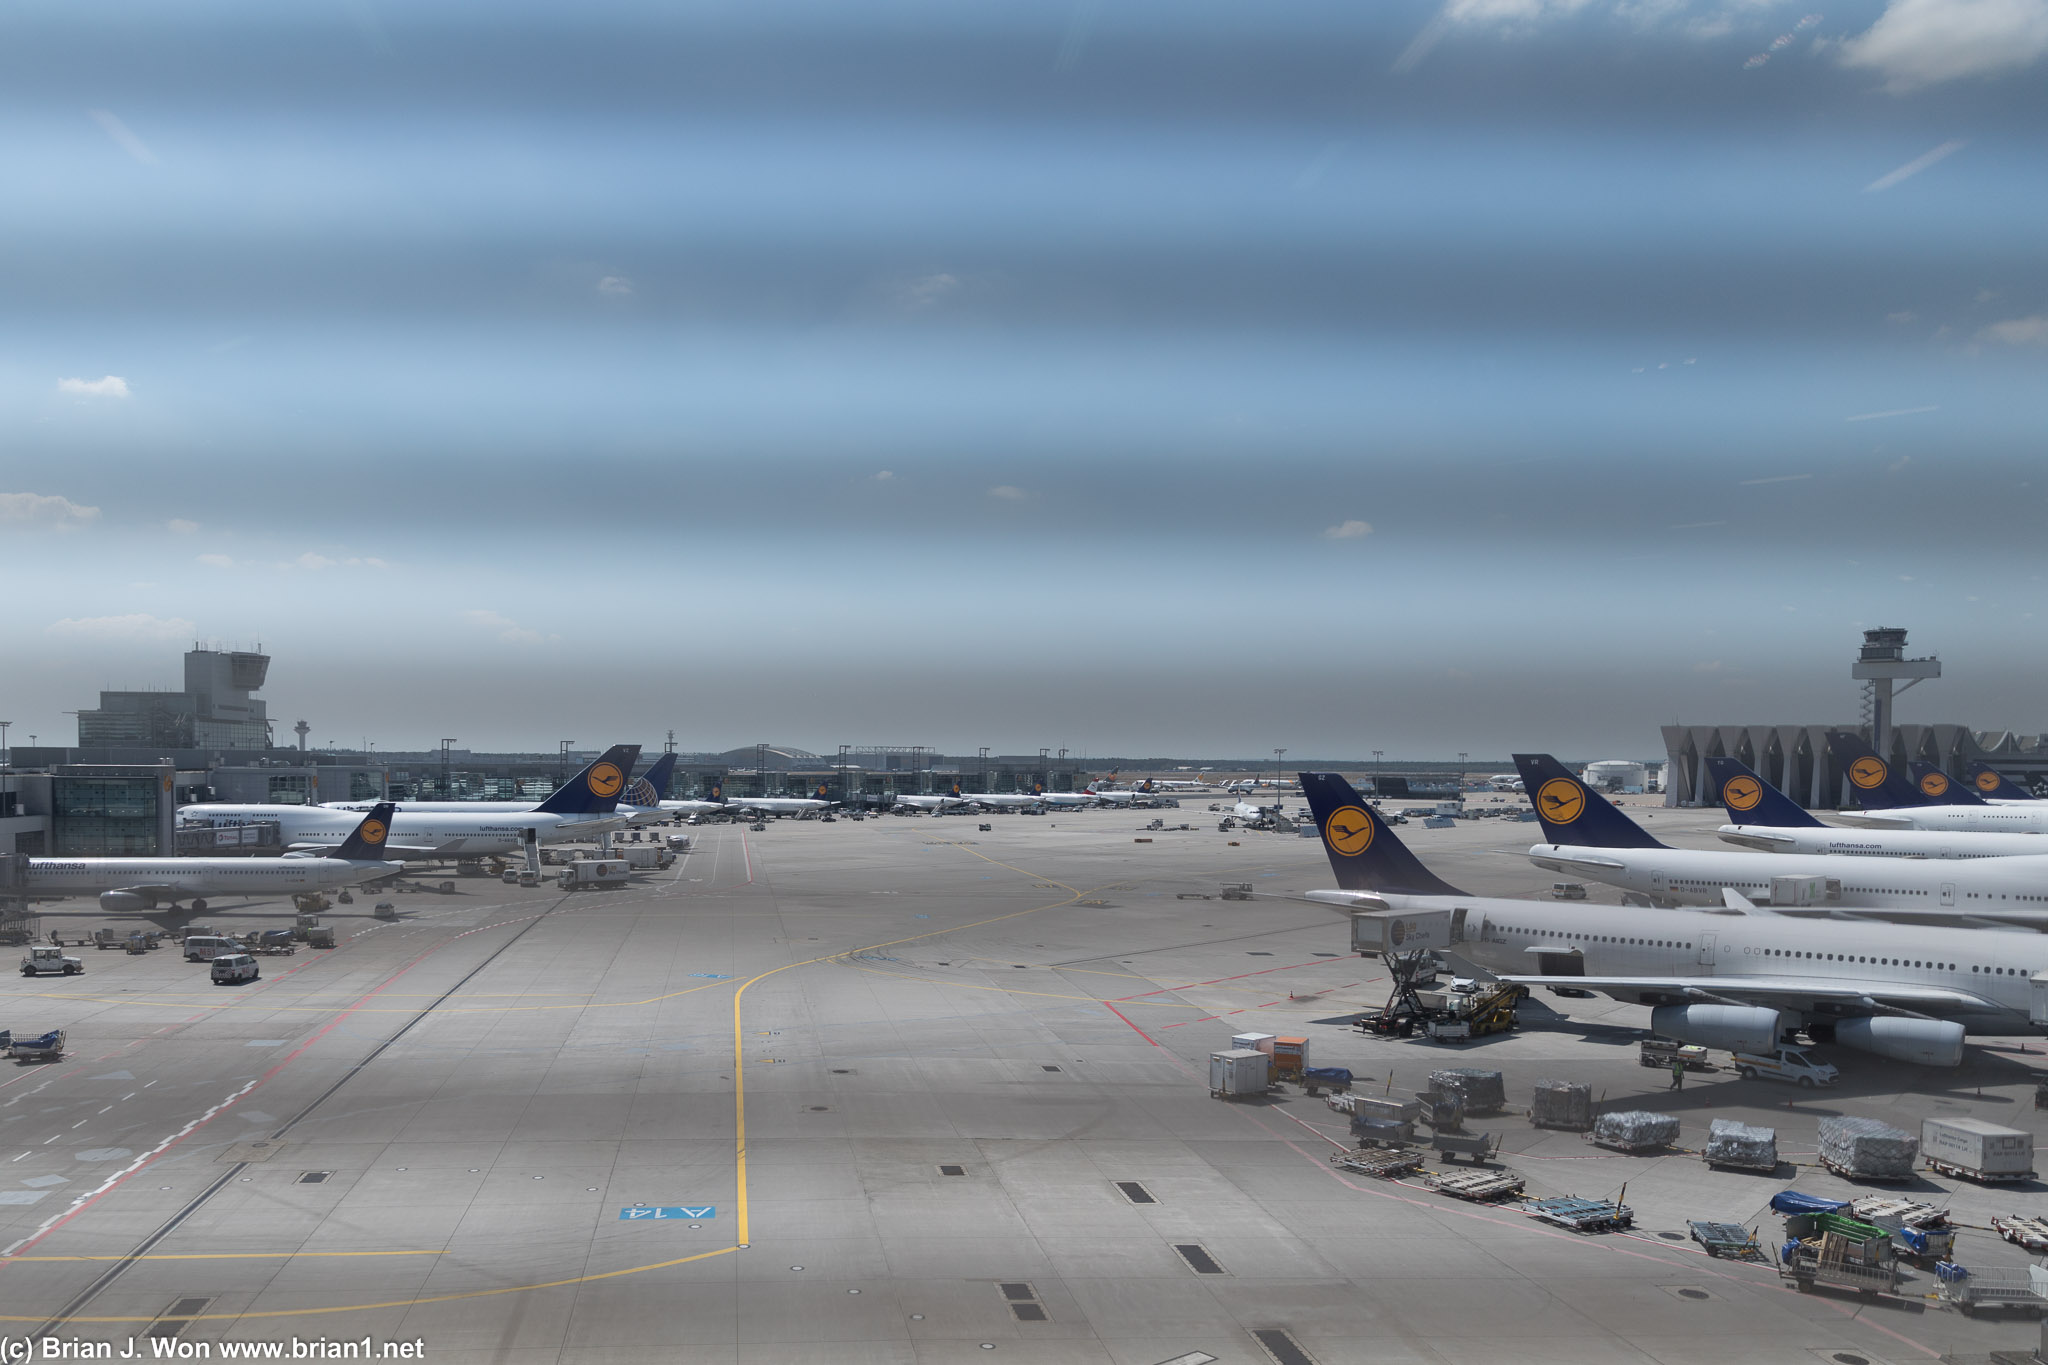 FRA is a busy LH hub. Two 747-8's, A380, and an A340 visible.